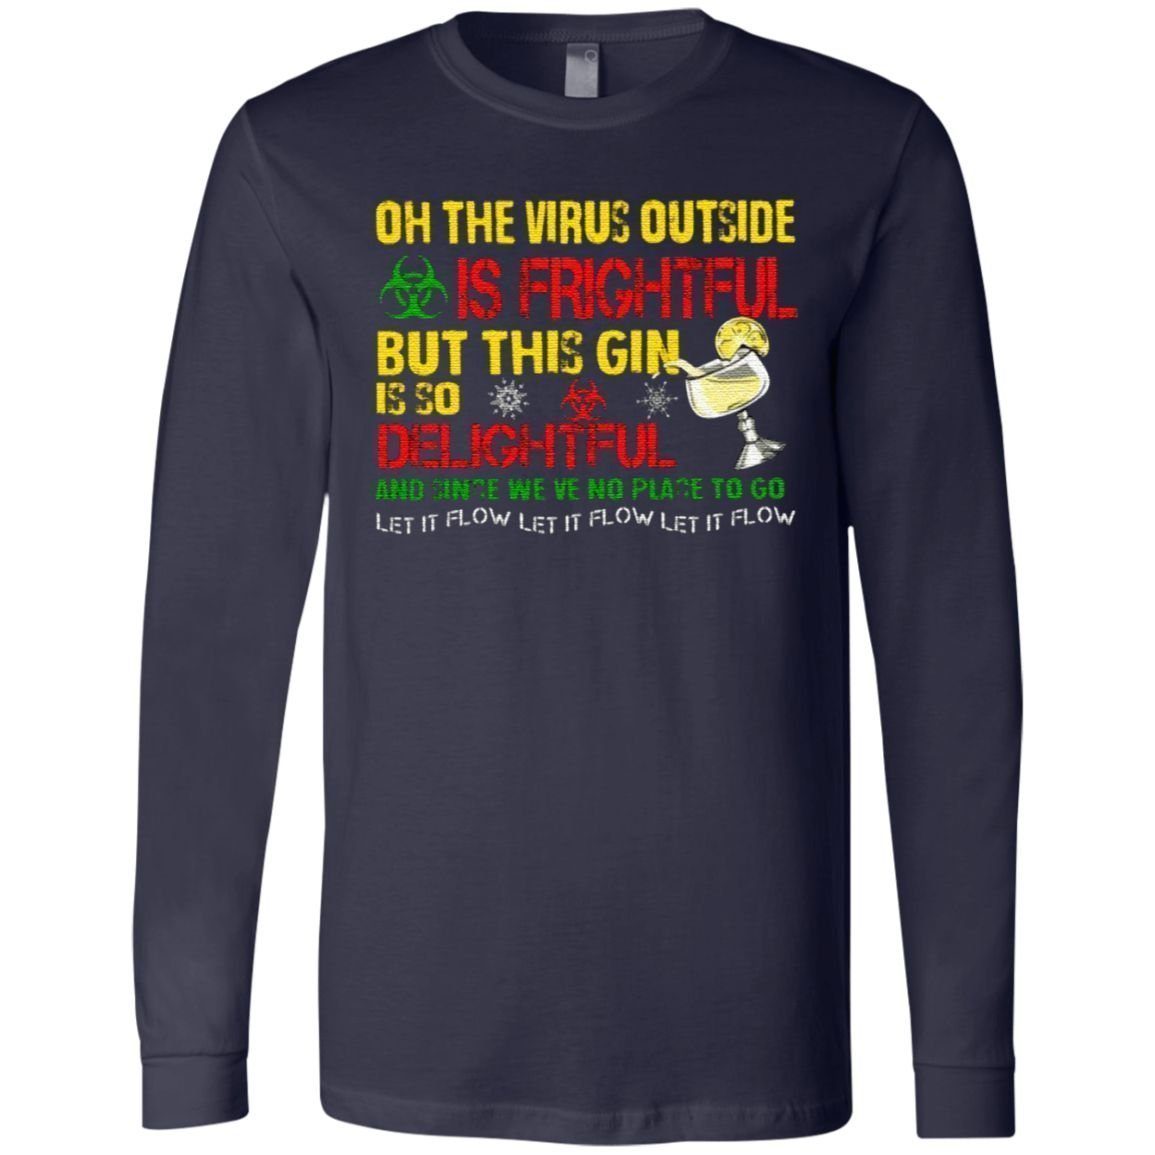 Oh The Virus Outside Is Frightful But This Gin Is So Delightful And Since We’ve No Place To Go Let It Flow T-Shirt